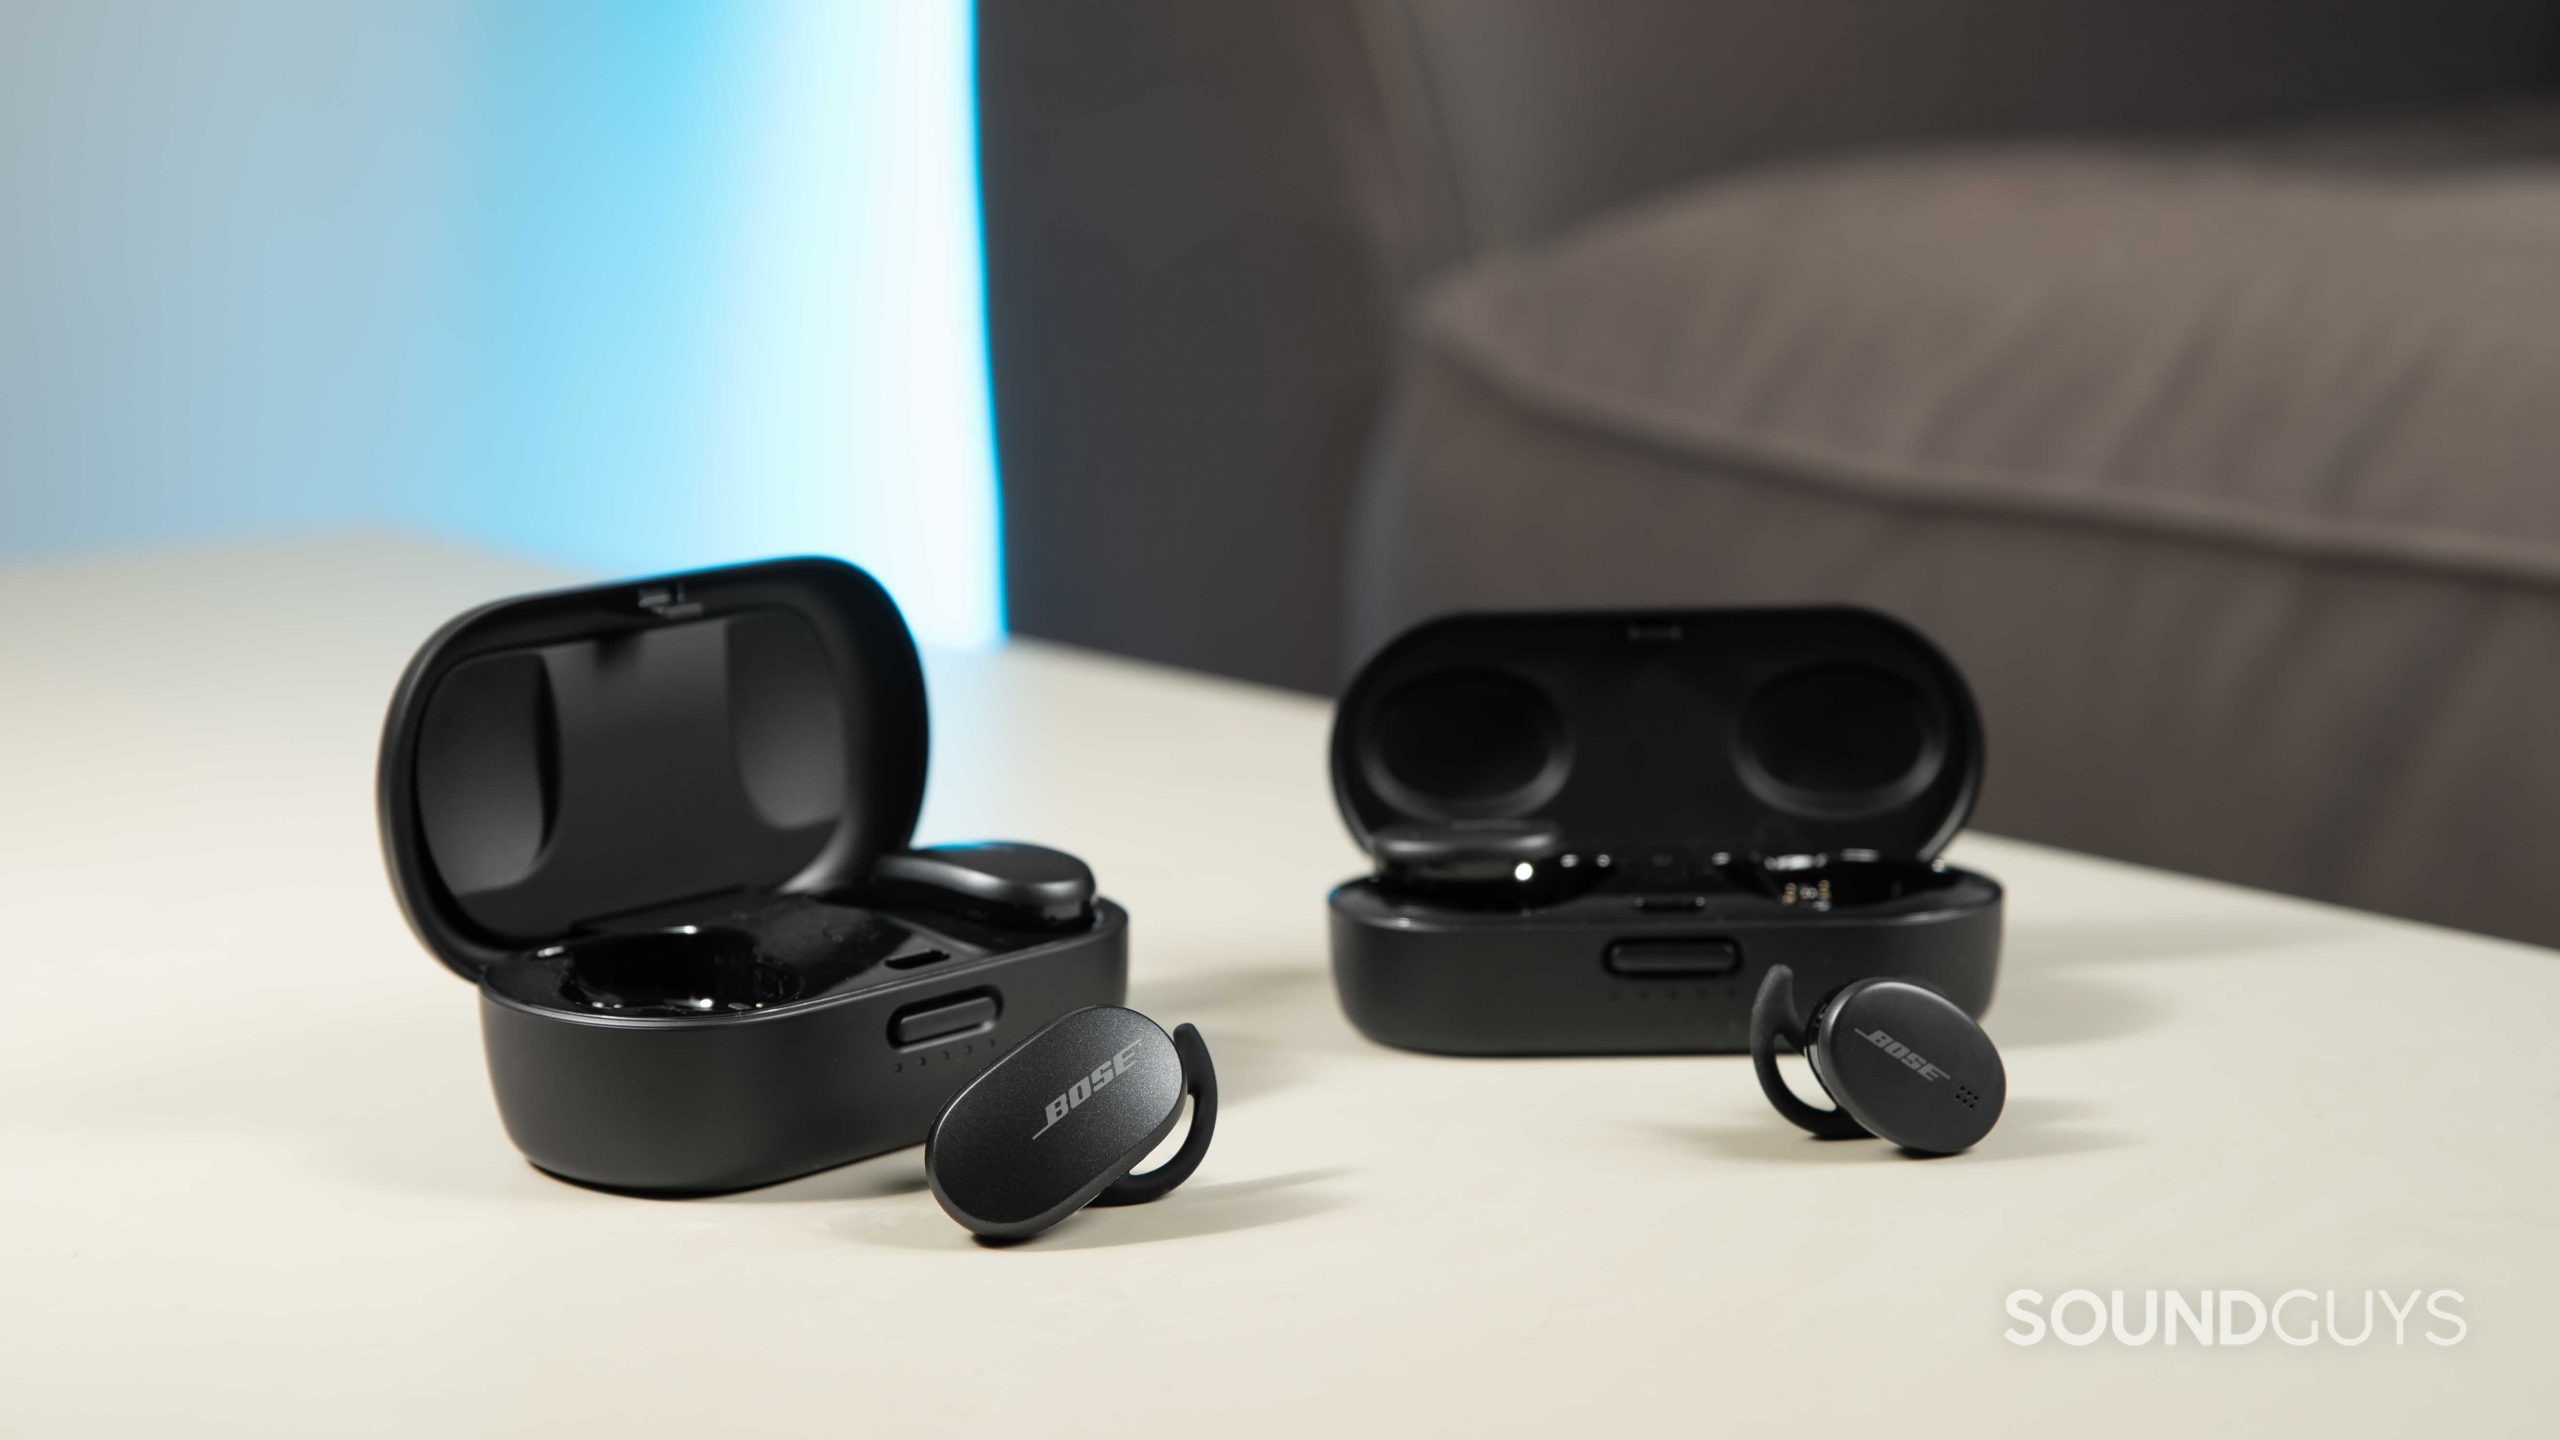 The Bose QuietComfort Earbuds noise canceling true wireless earbuds next to the Bose Sport Earbuds for a size comparison.